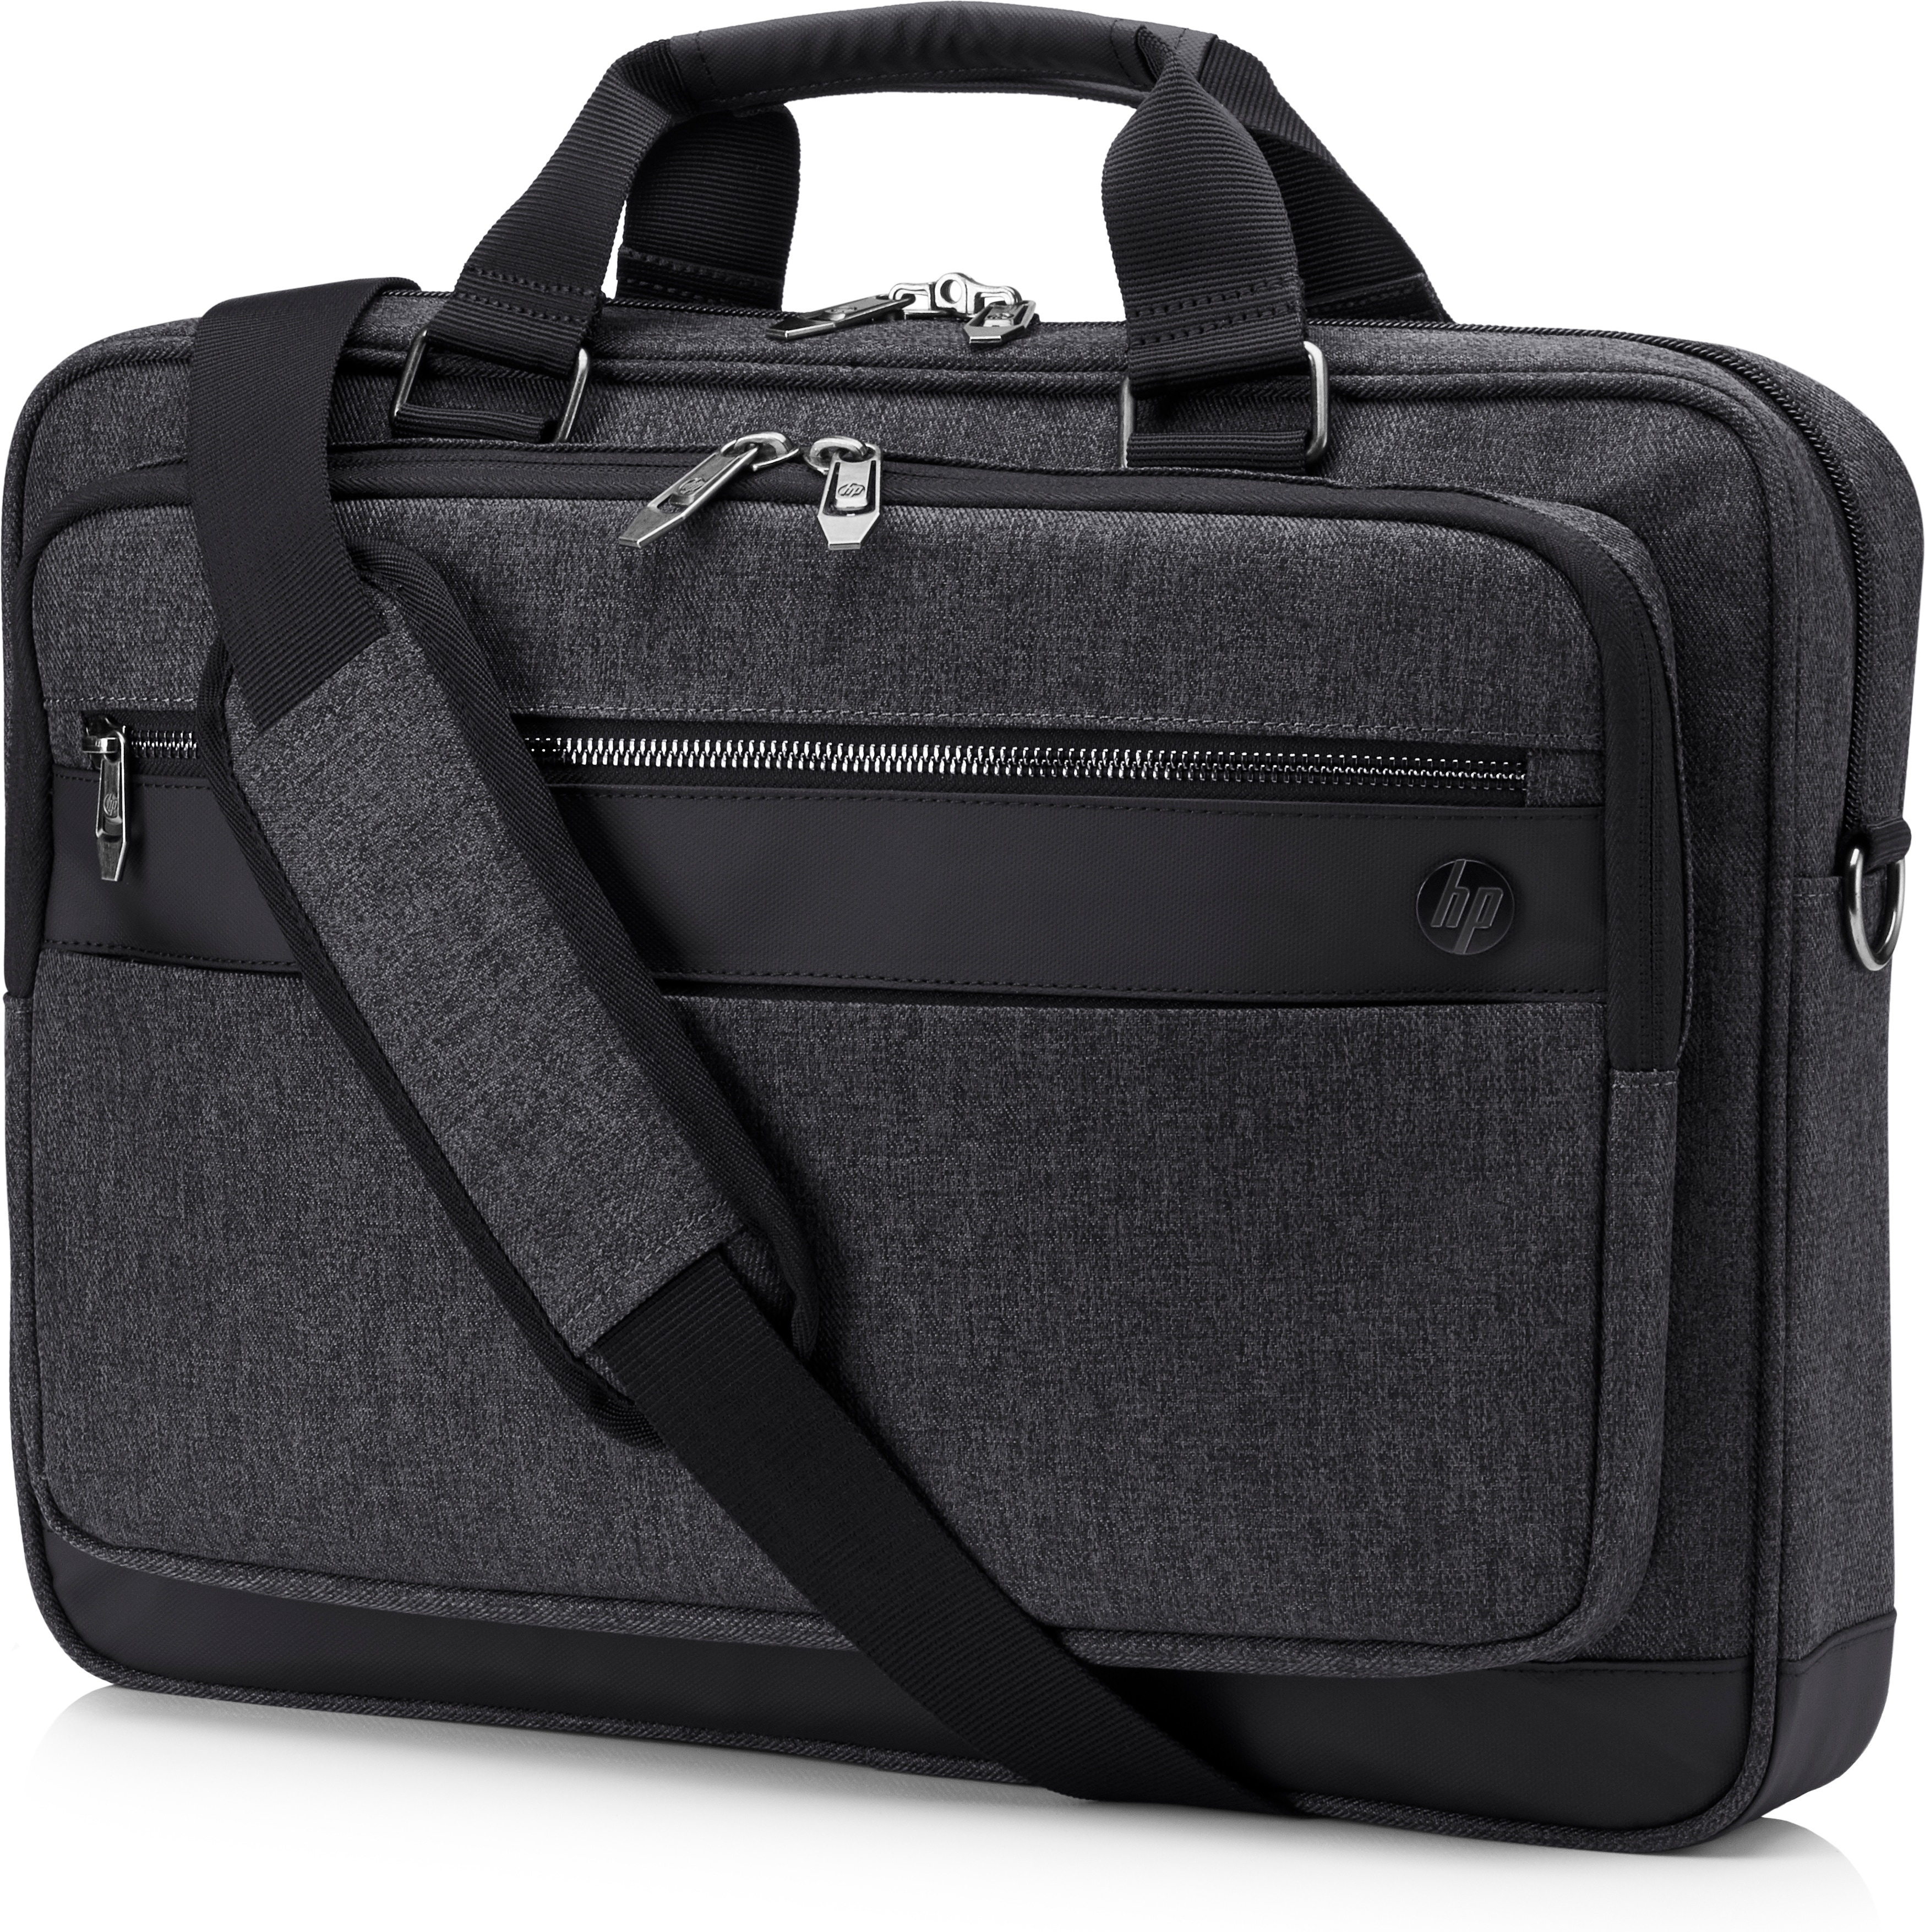 Hp Hp Executive Top Load - Notebook Carrying Case - 15.6" - Black - For Elite Mobile Thin Client Mt645 G7; Elitebook 830 G6; Pro Mobile Thin Client Mt440 G3 6kd06aa - xep01